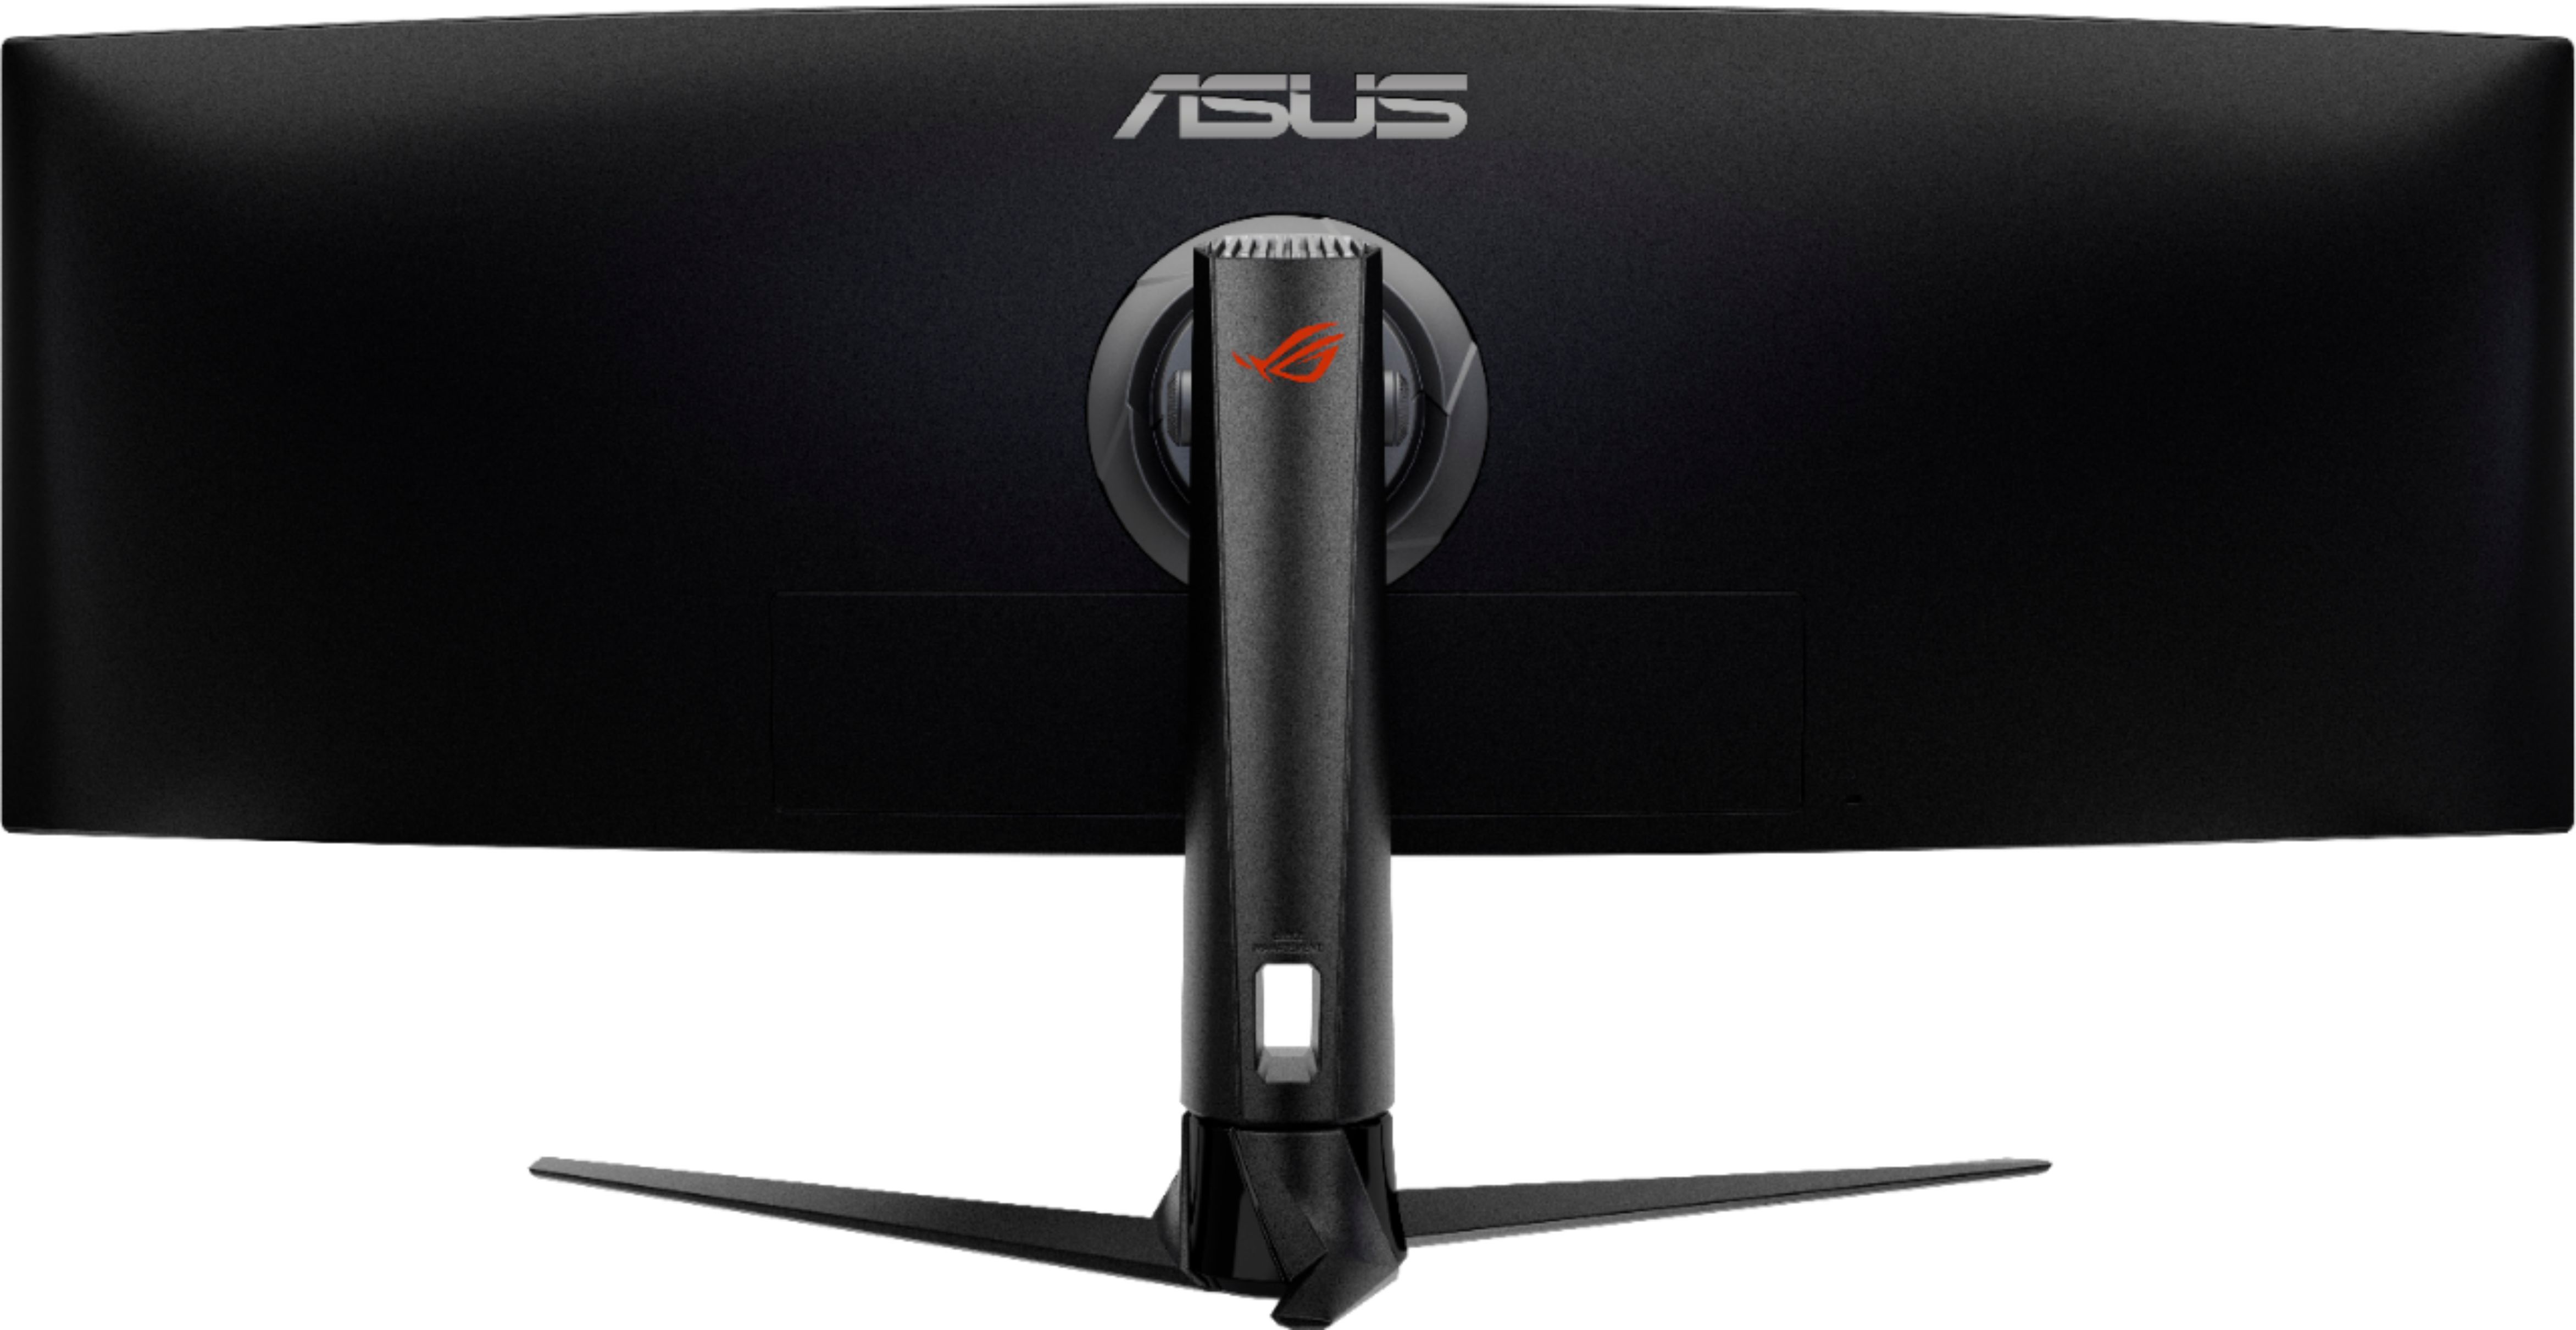 Back View: ASUS - Geek Squad Certified Refurbished 49" LED Curved FHD FreeSync Monitor with HDR - Black